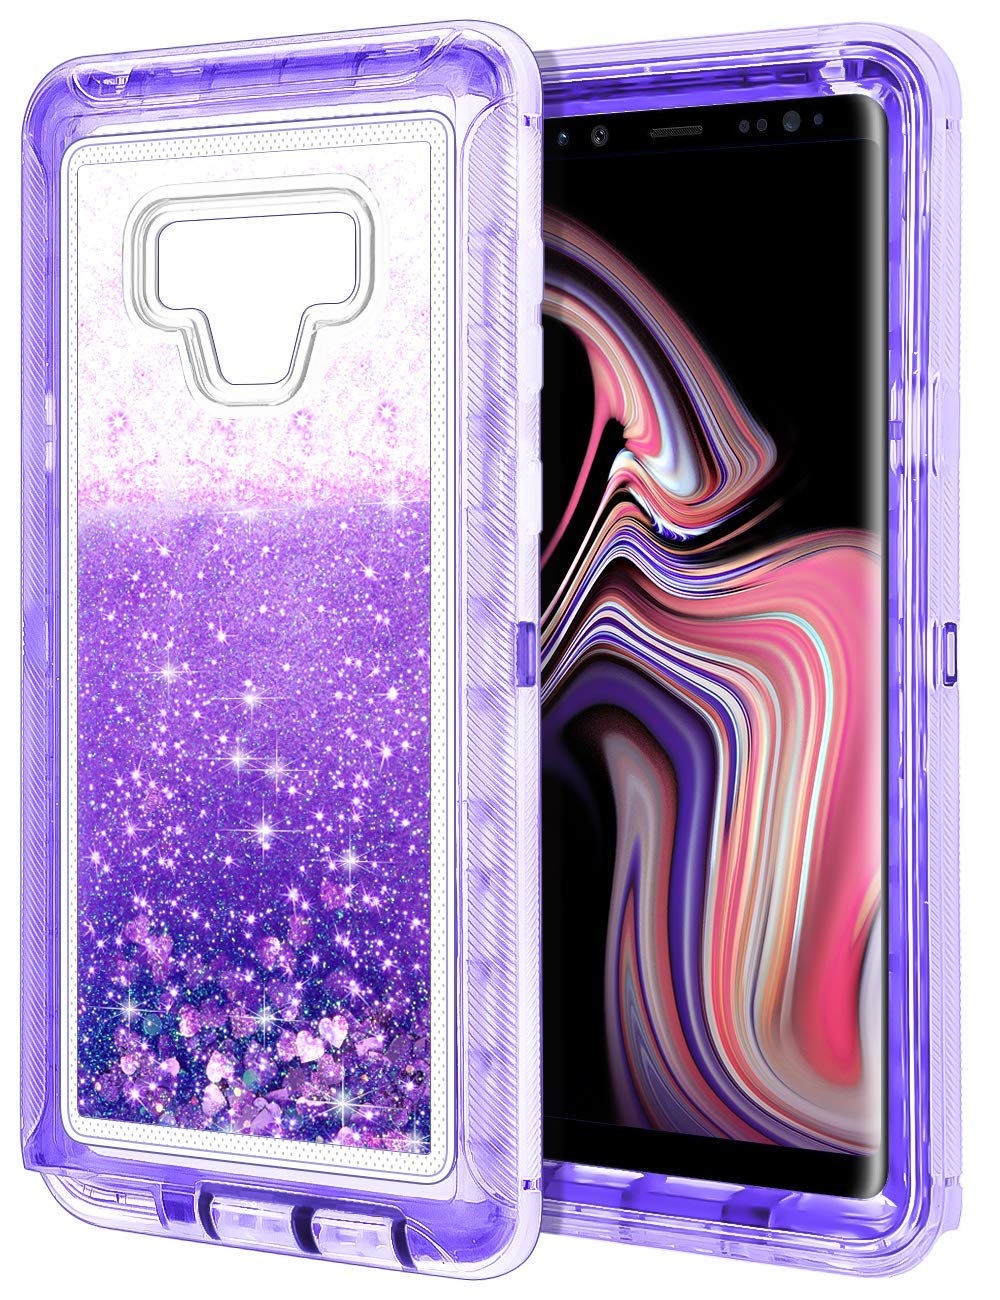 Galaxy Note 9 Star Dust Quick Stand Clear Armor Robot Case (Purple)